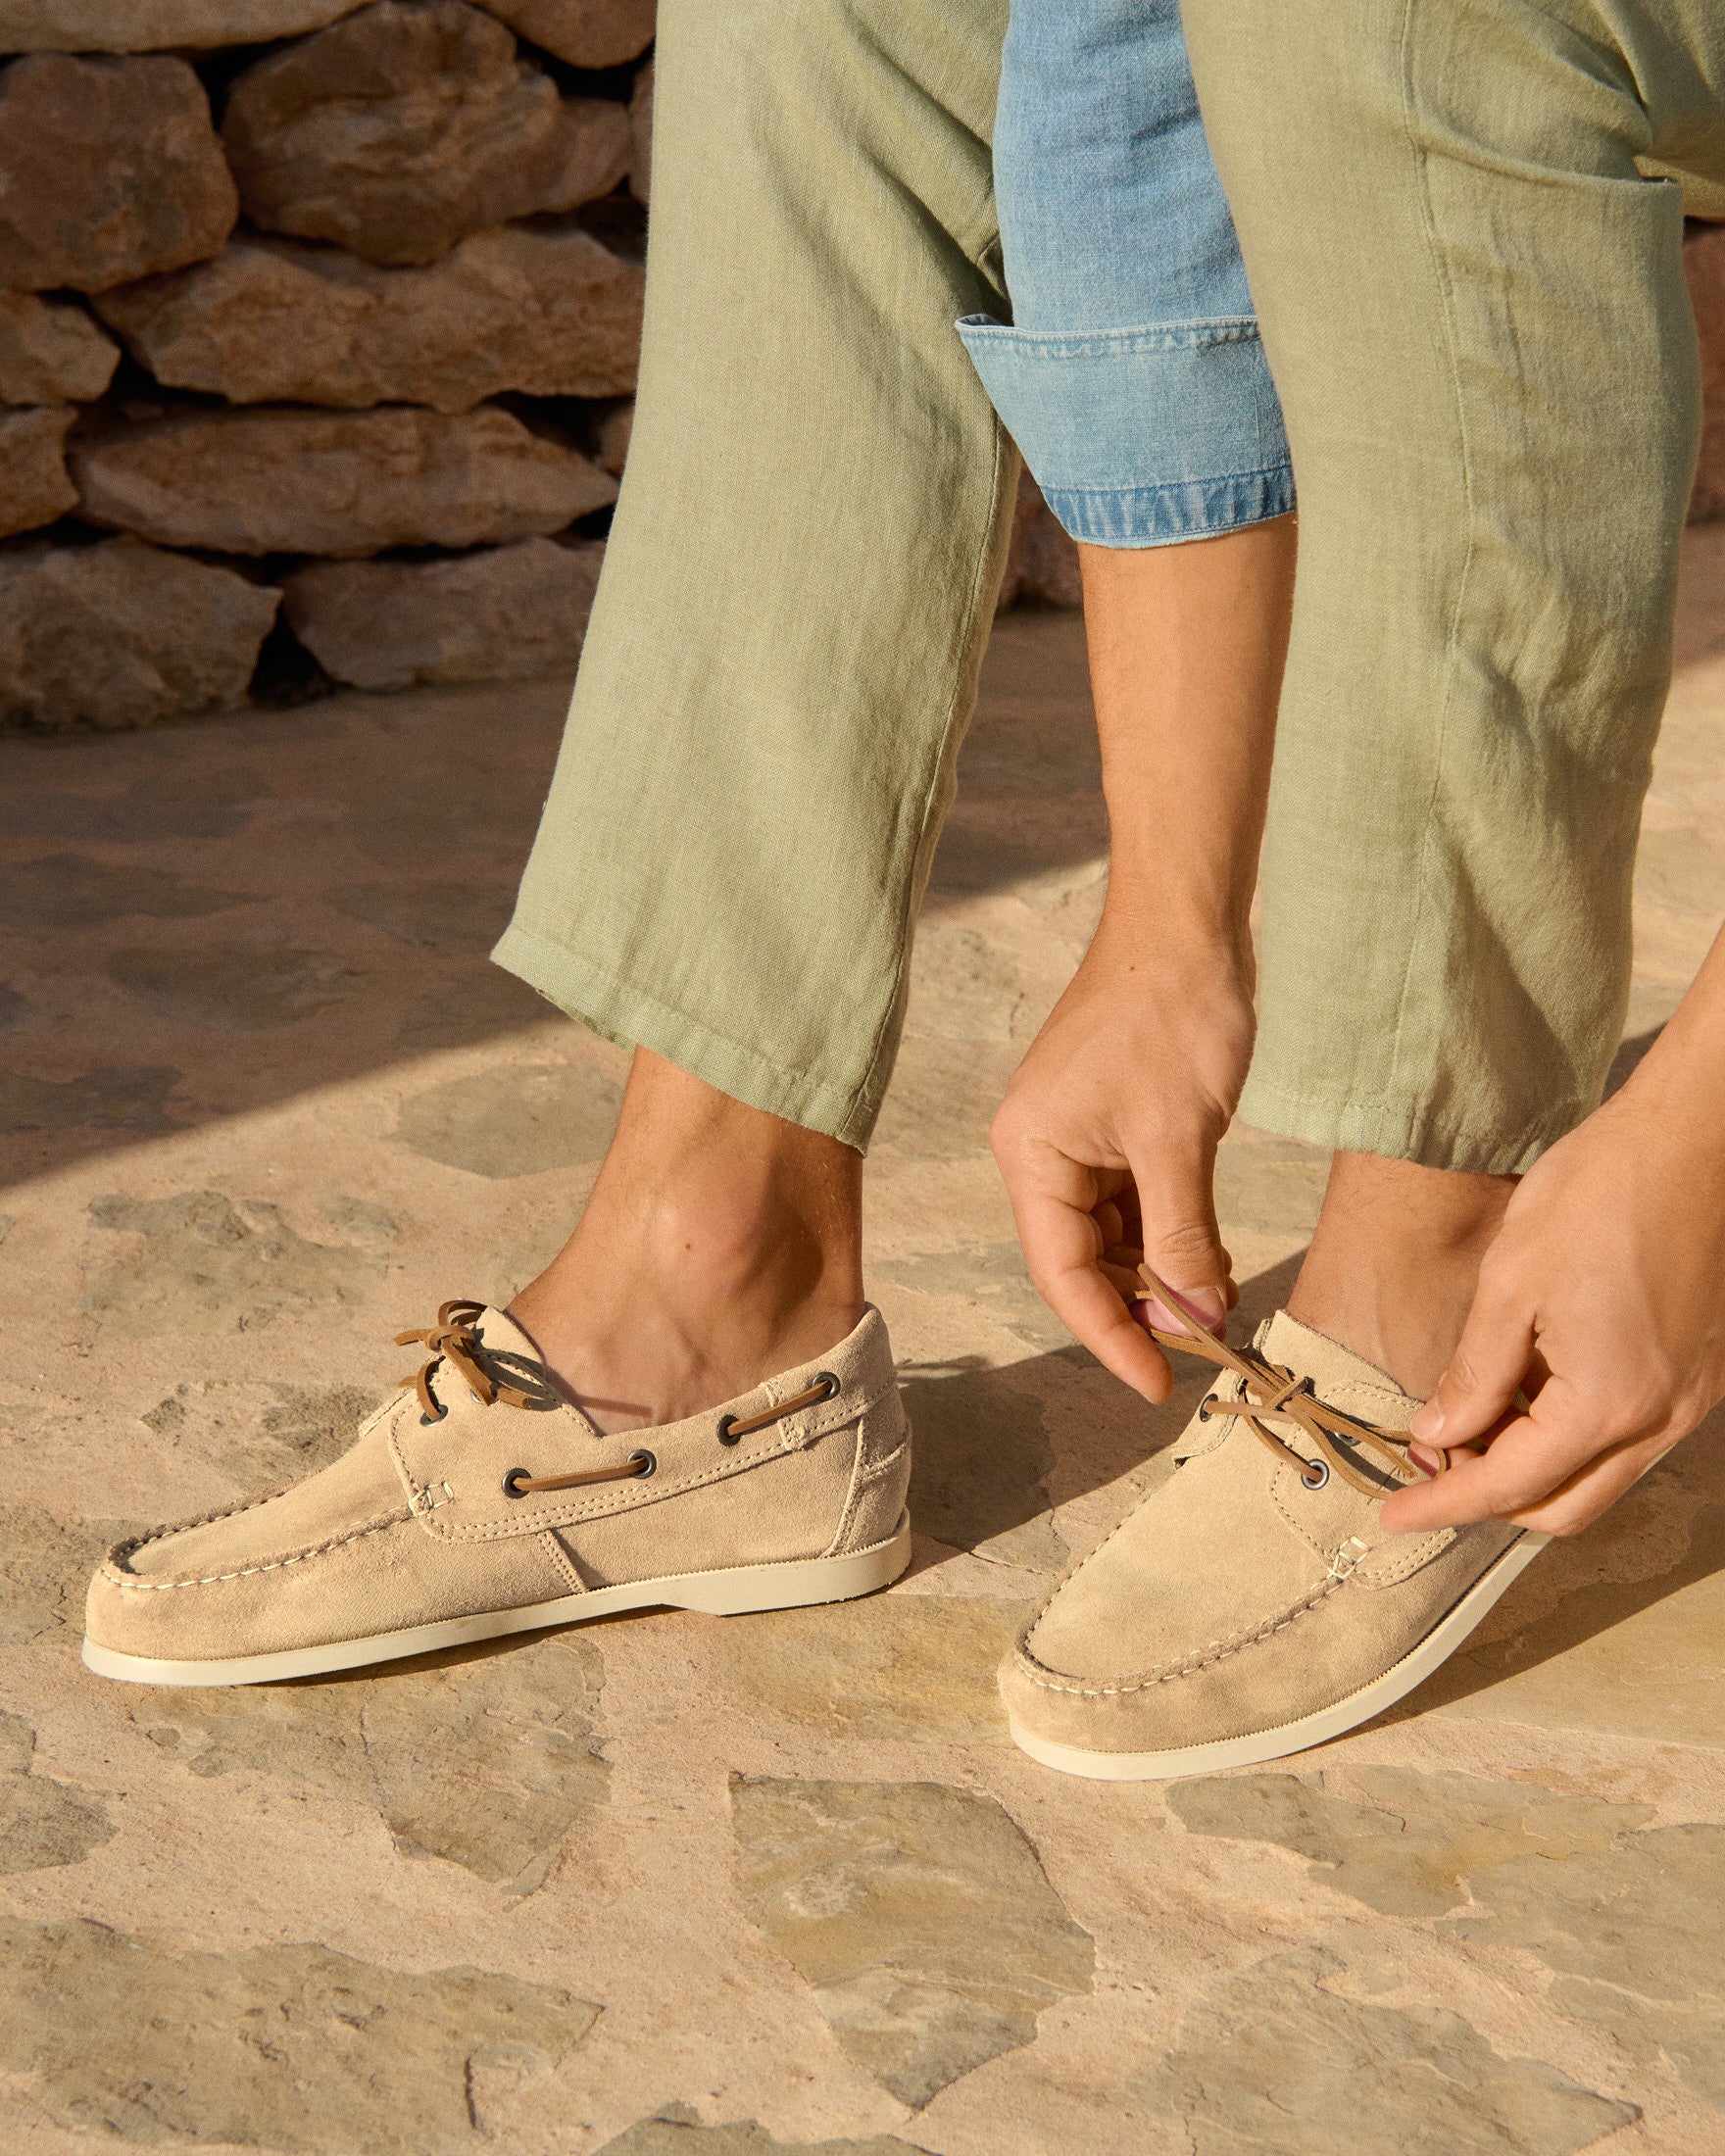 Suede Boat-Shoes - Hamptons Champagne Beige